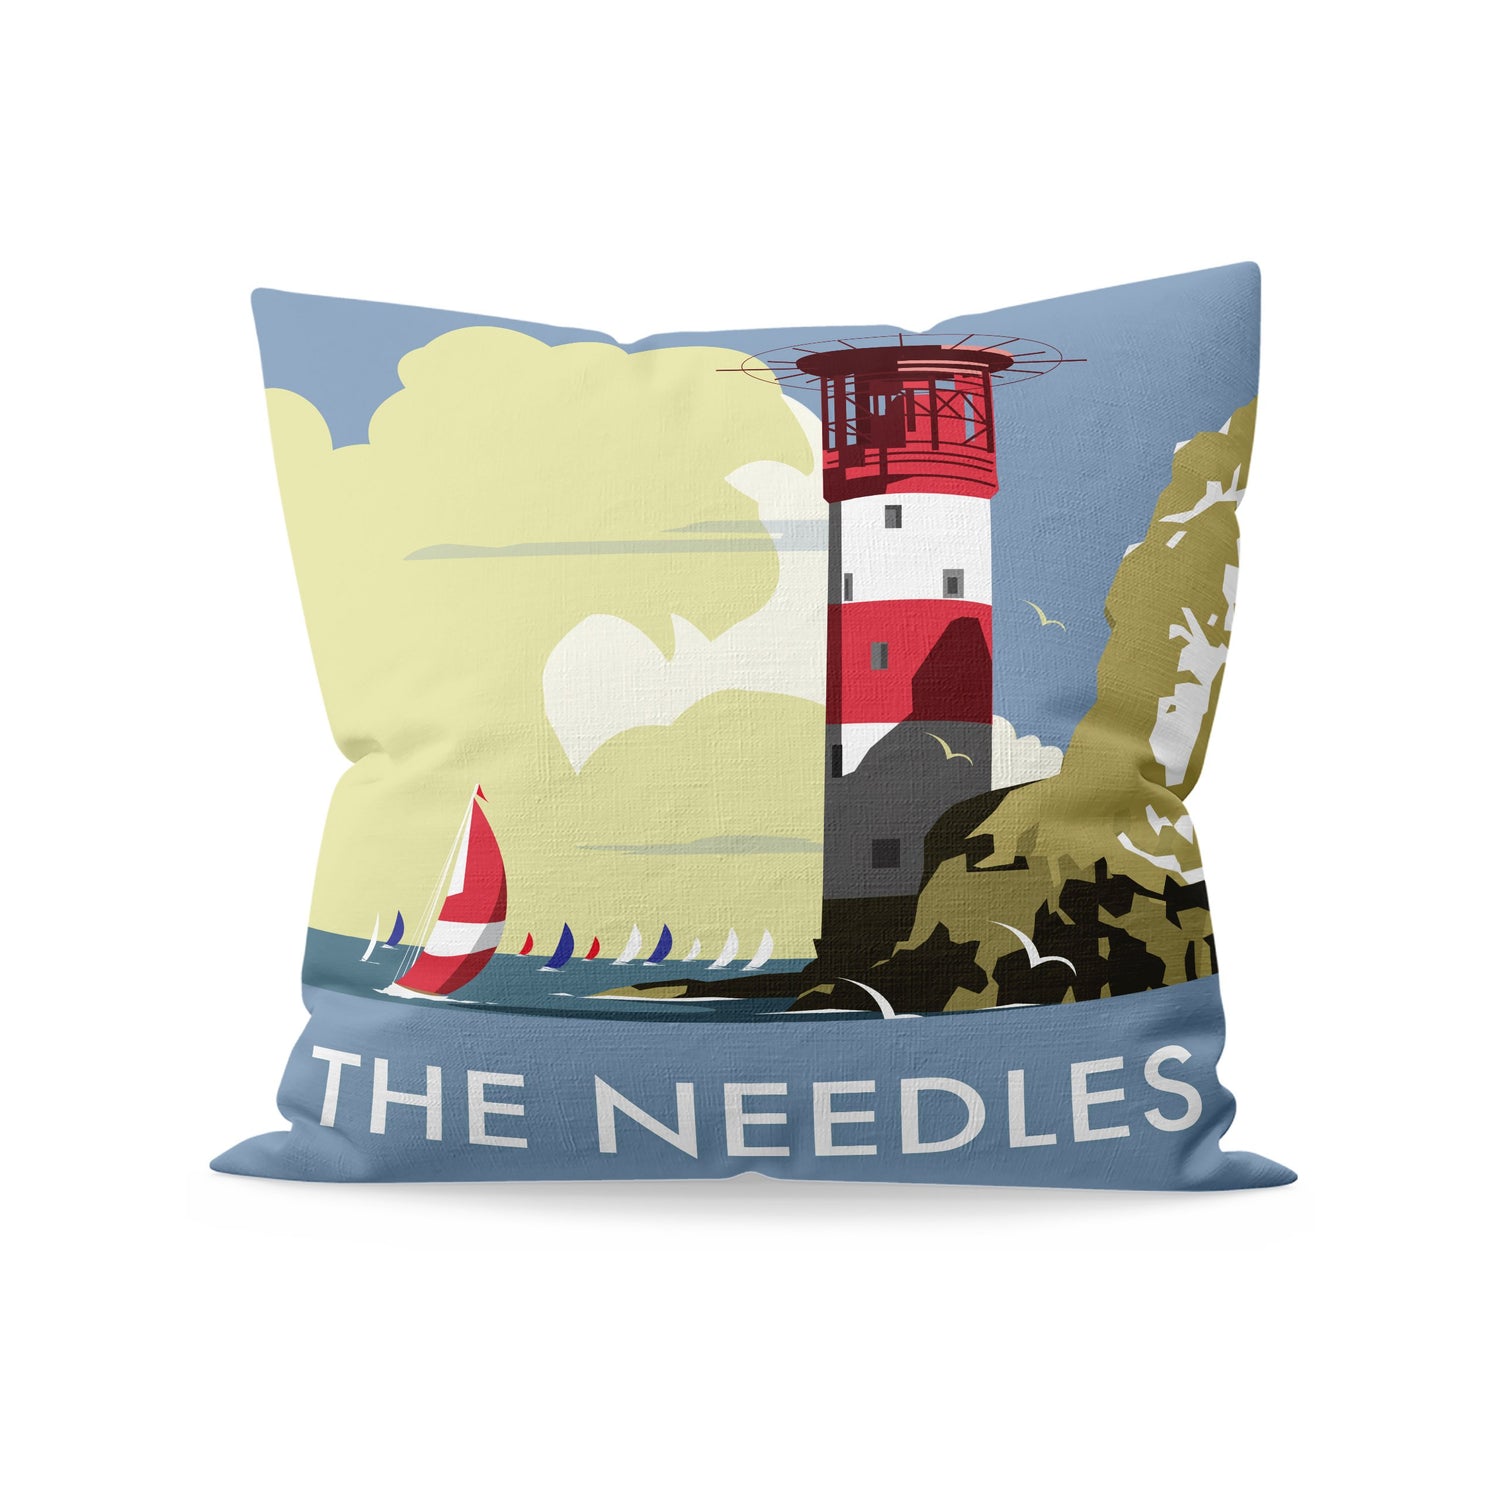 The Needles, Isle of Wight Fibre Filled Cushion